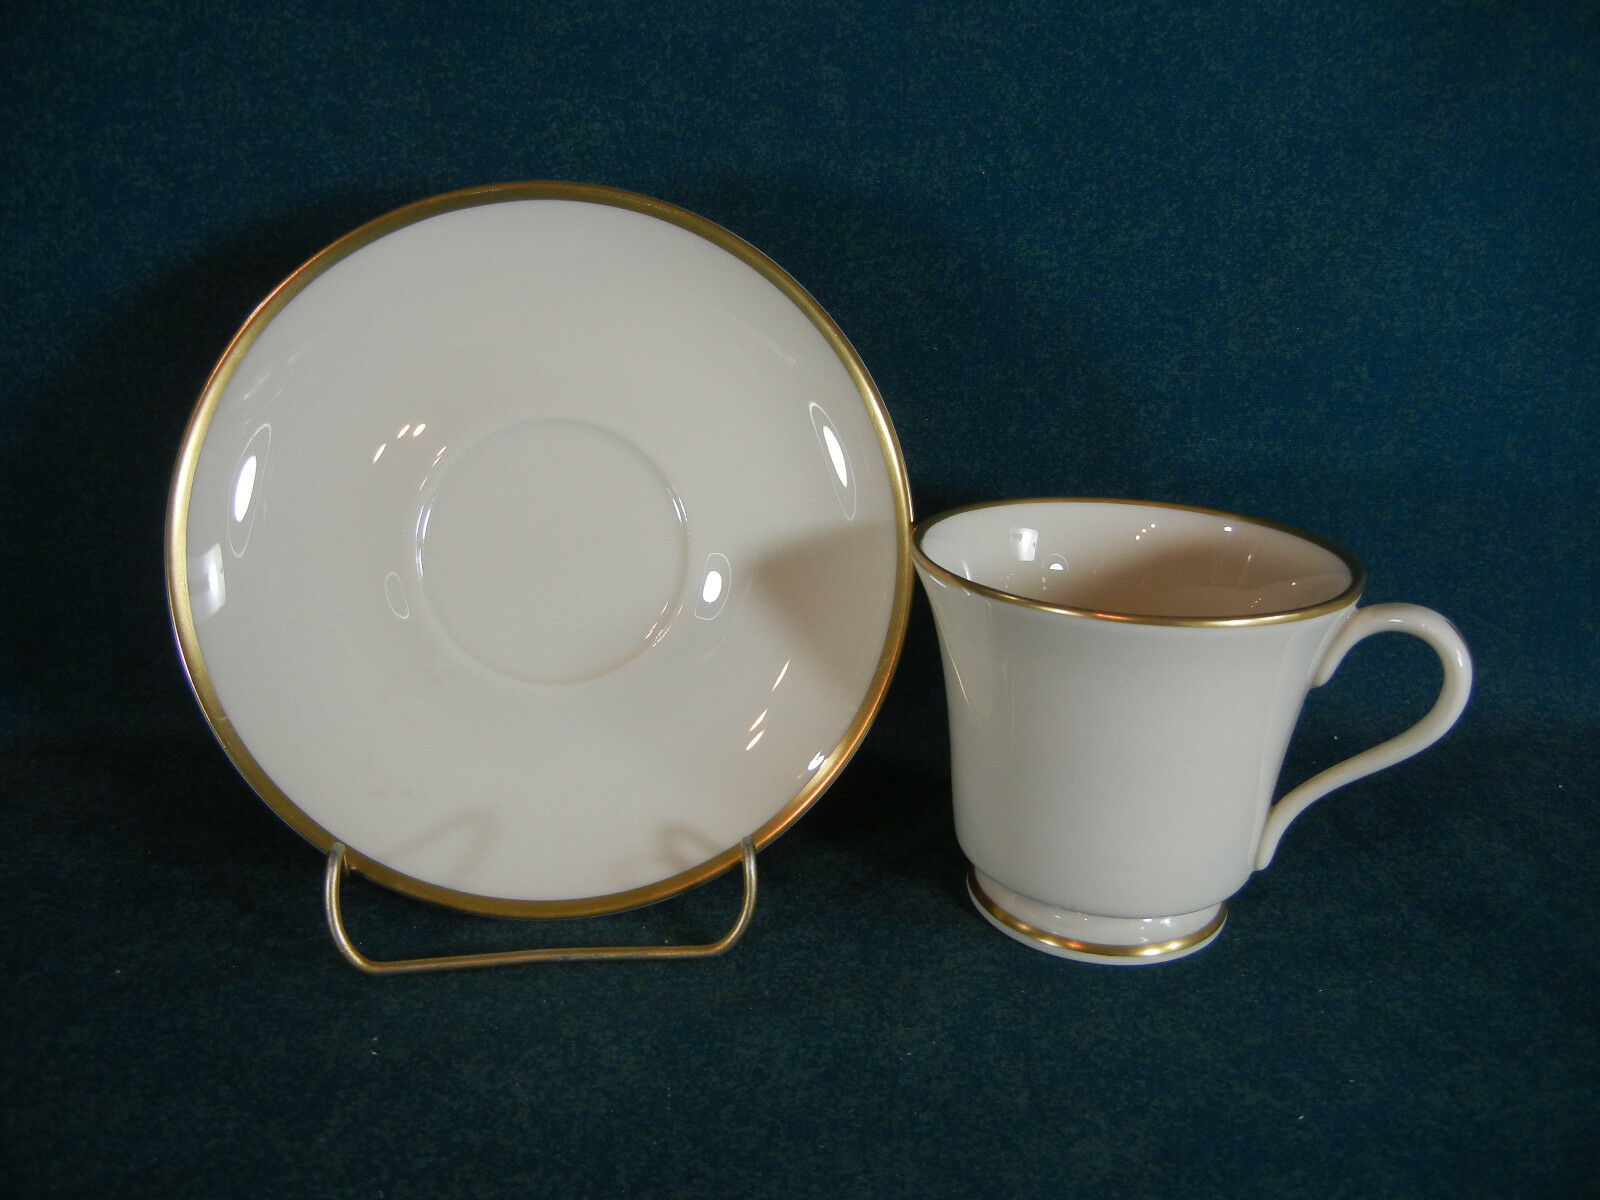 Gorham China Gold Coupe Cup And Saucer Set(s)